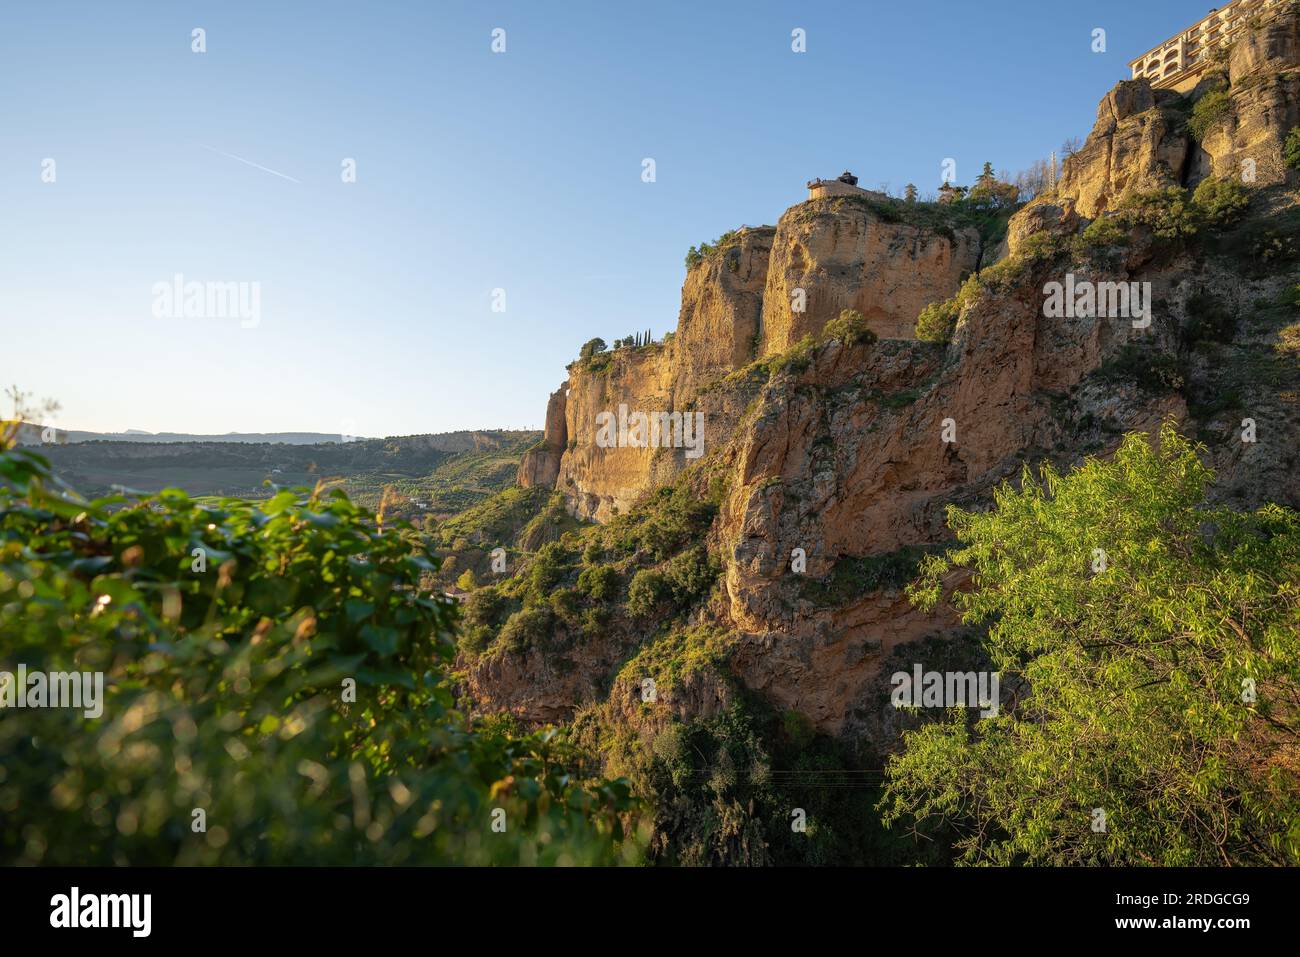 Ronda Cliff Rock Formations - Ronda, Andalusia, Spain Stock Photo